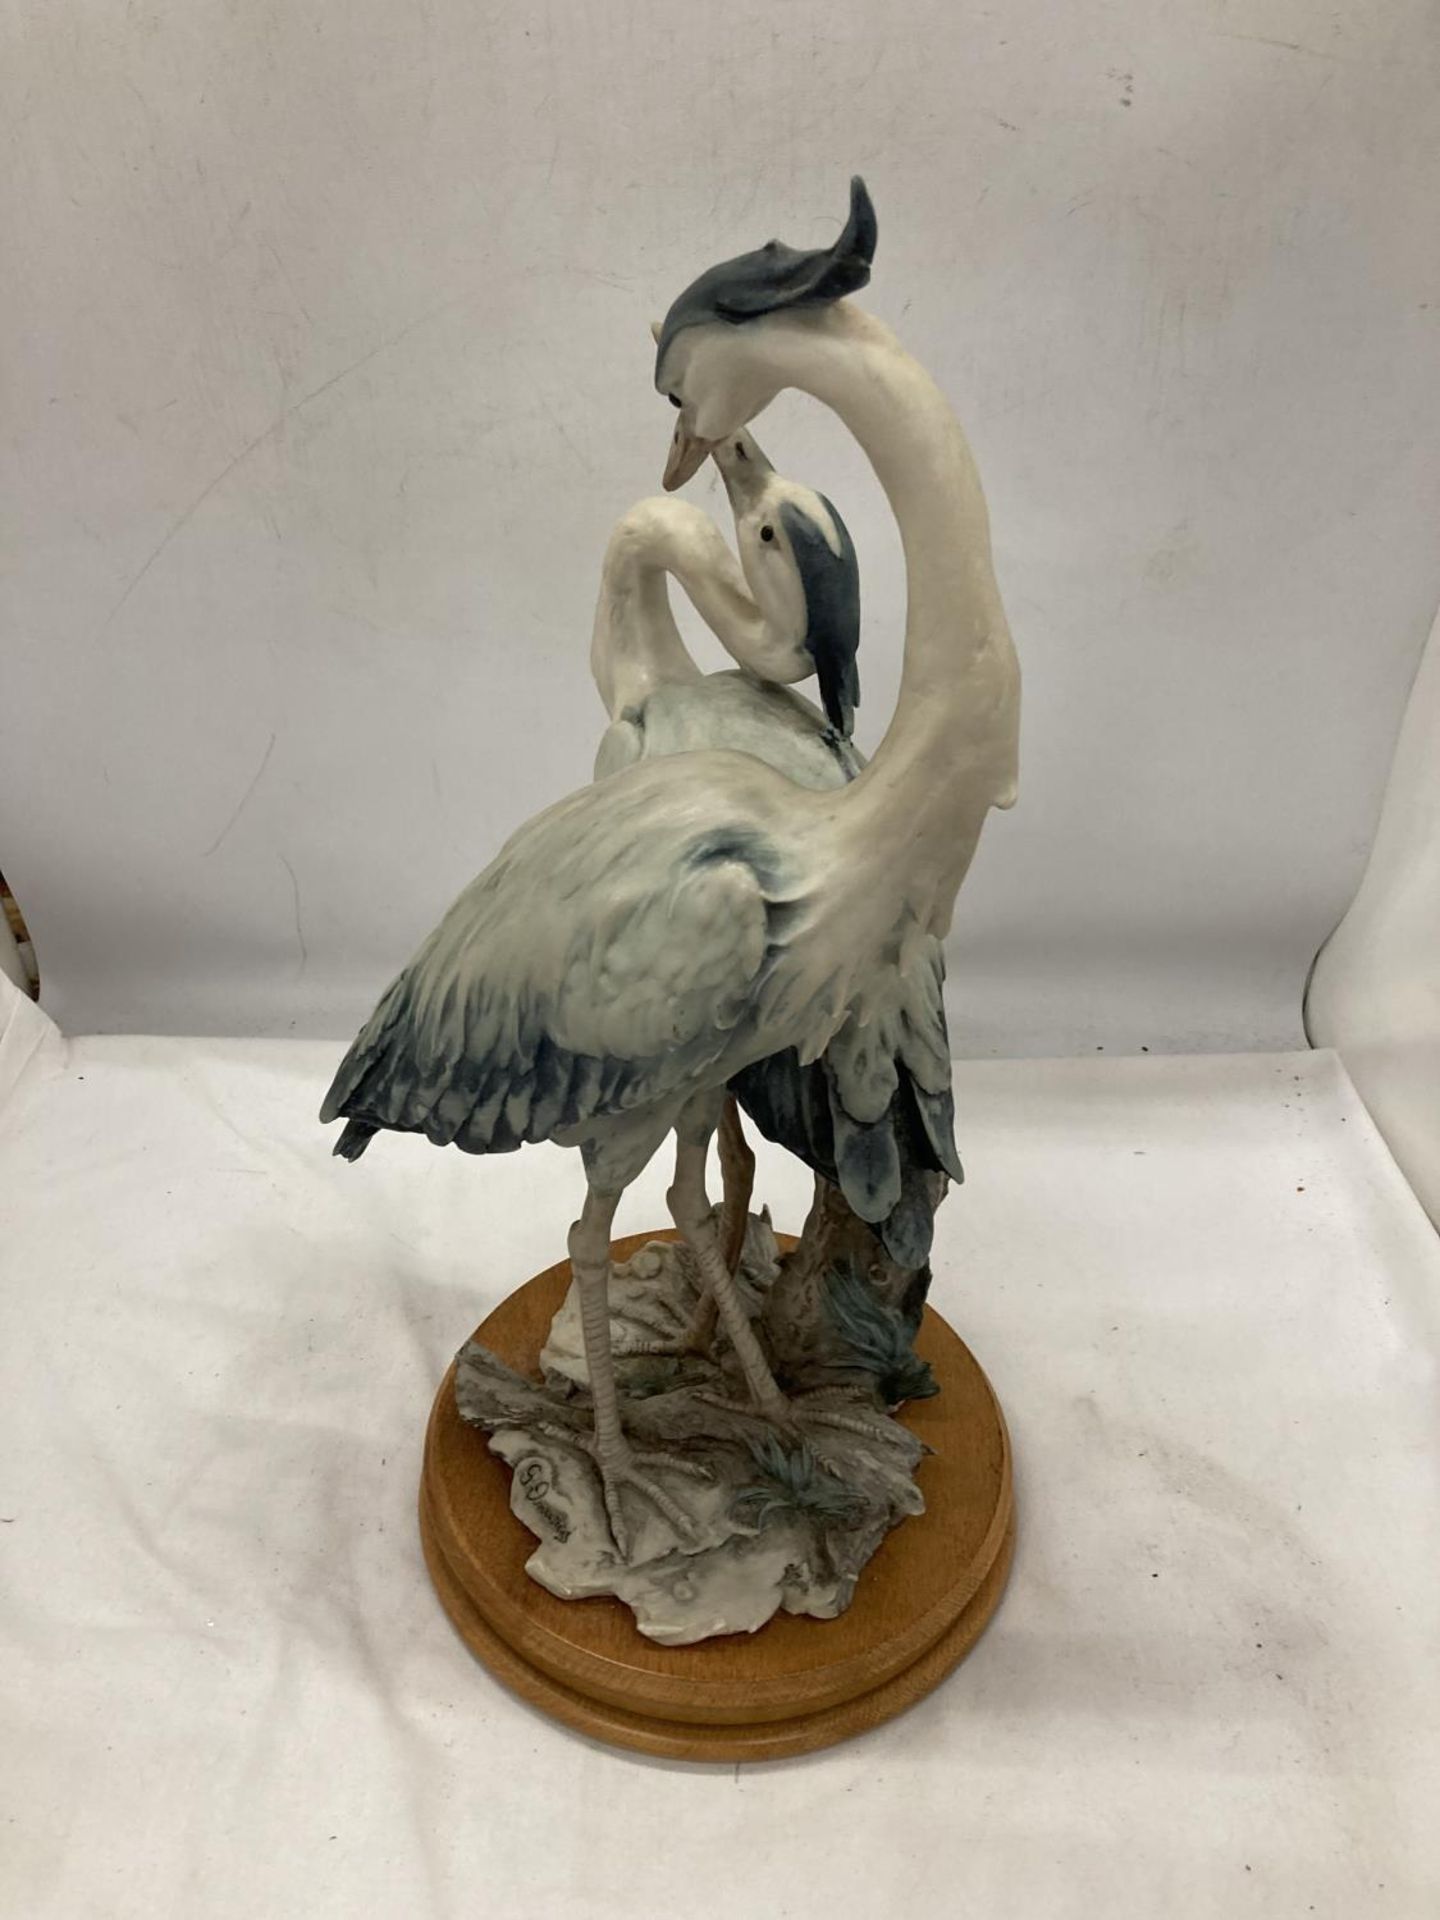 A CAPODIMONTE ITALIAN SCULPTURE OF TWO HERONS BY GIUSEPPE ARMANI HEIGHT 41 CM - Image 2 of 4